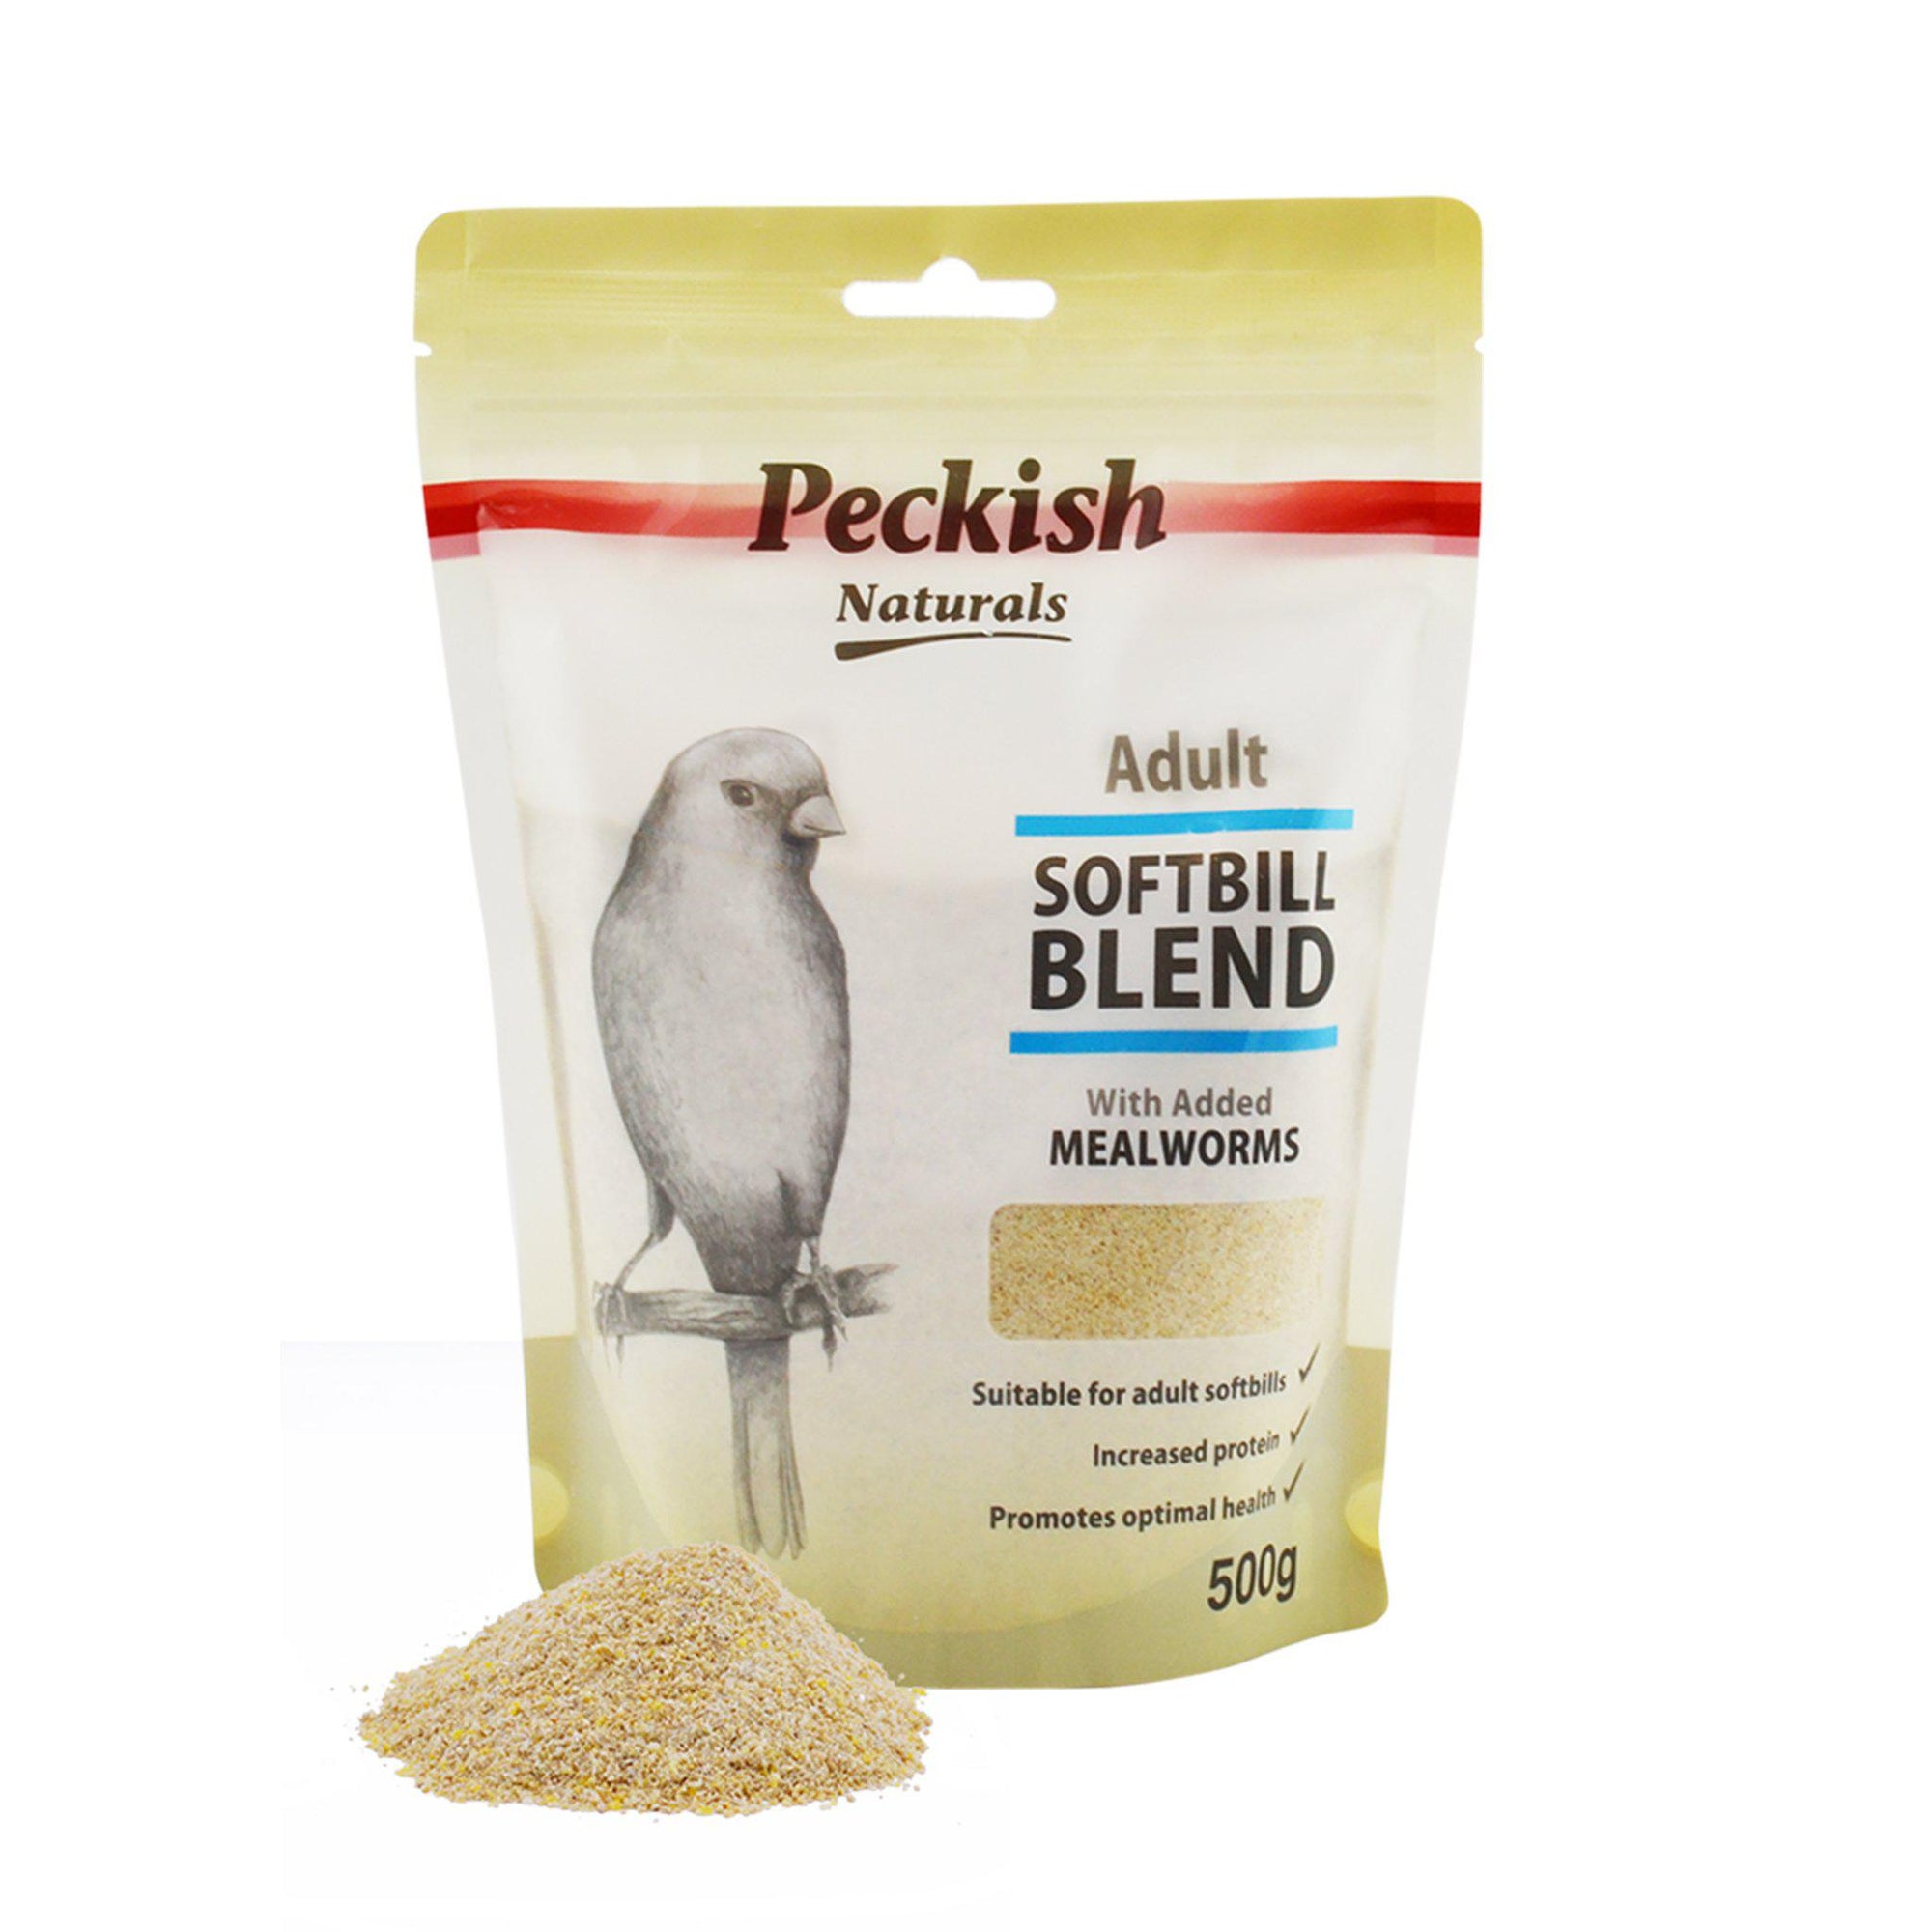 Peckish Naturals Adult Softbill Blend - Mealworm - ComfyPet Products